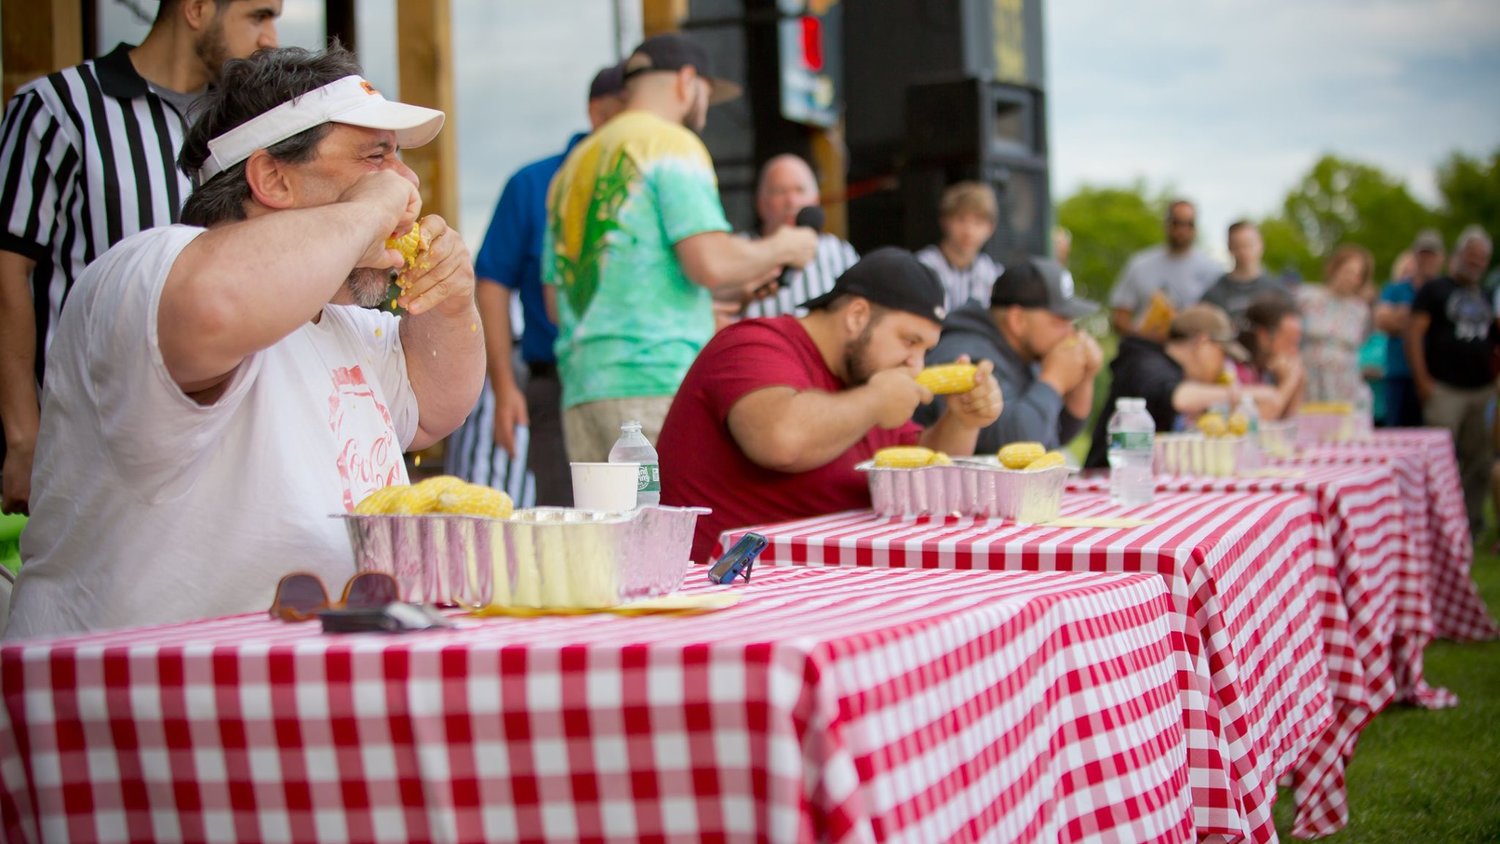 The corn on the cob eating contest, with a $1,000 cash prize, is open to those ages 18 and older.